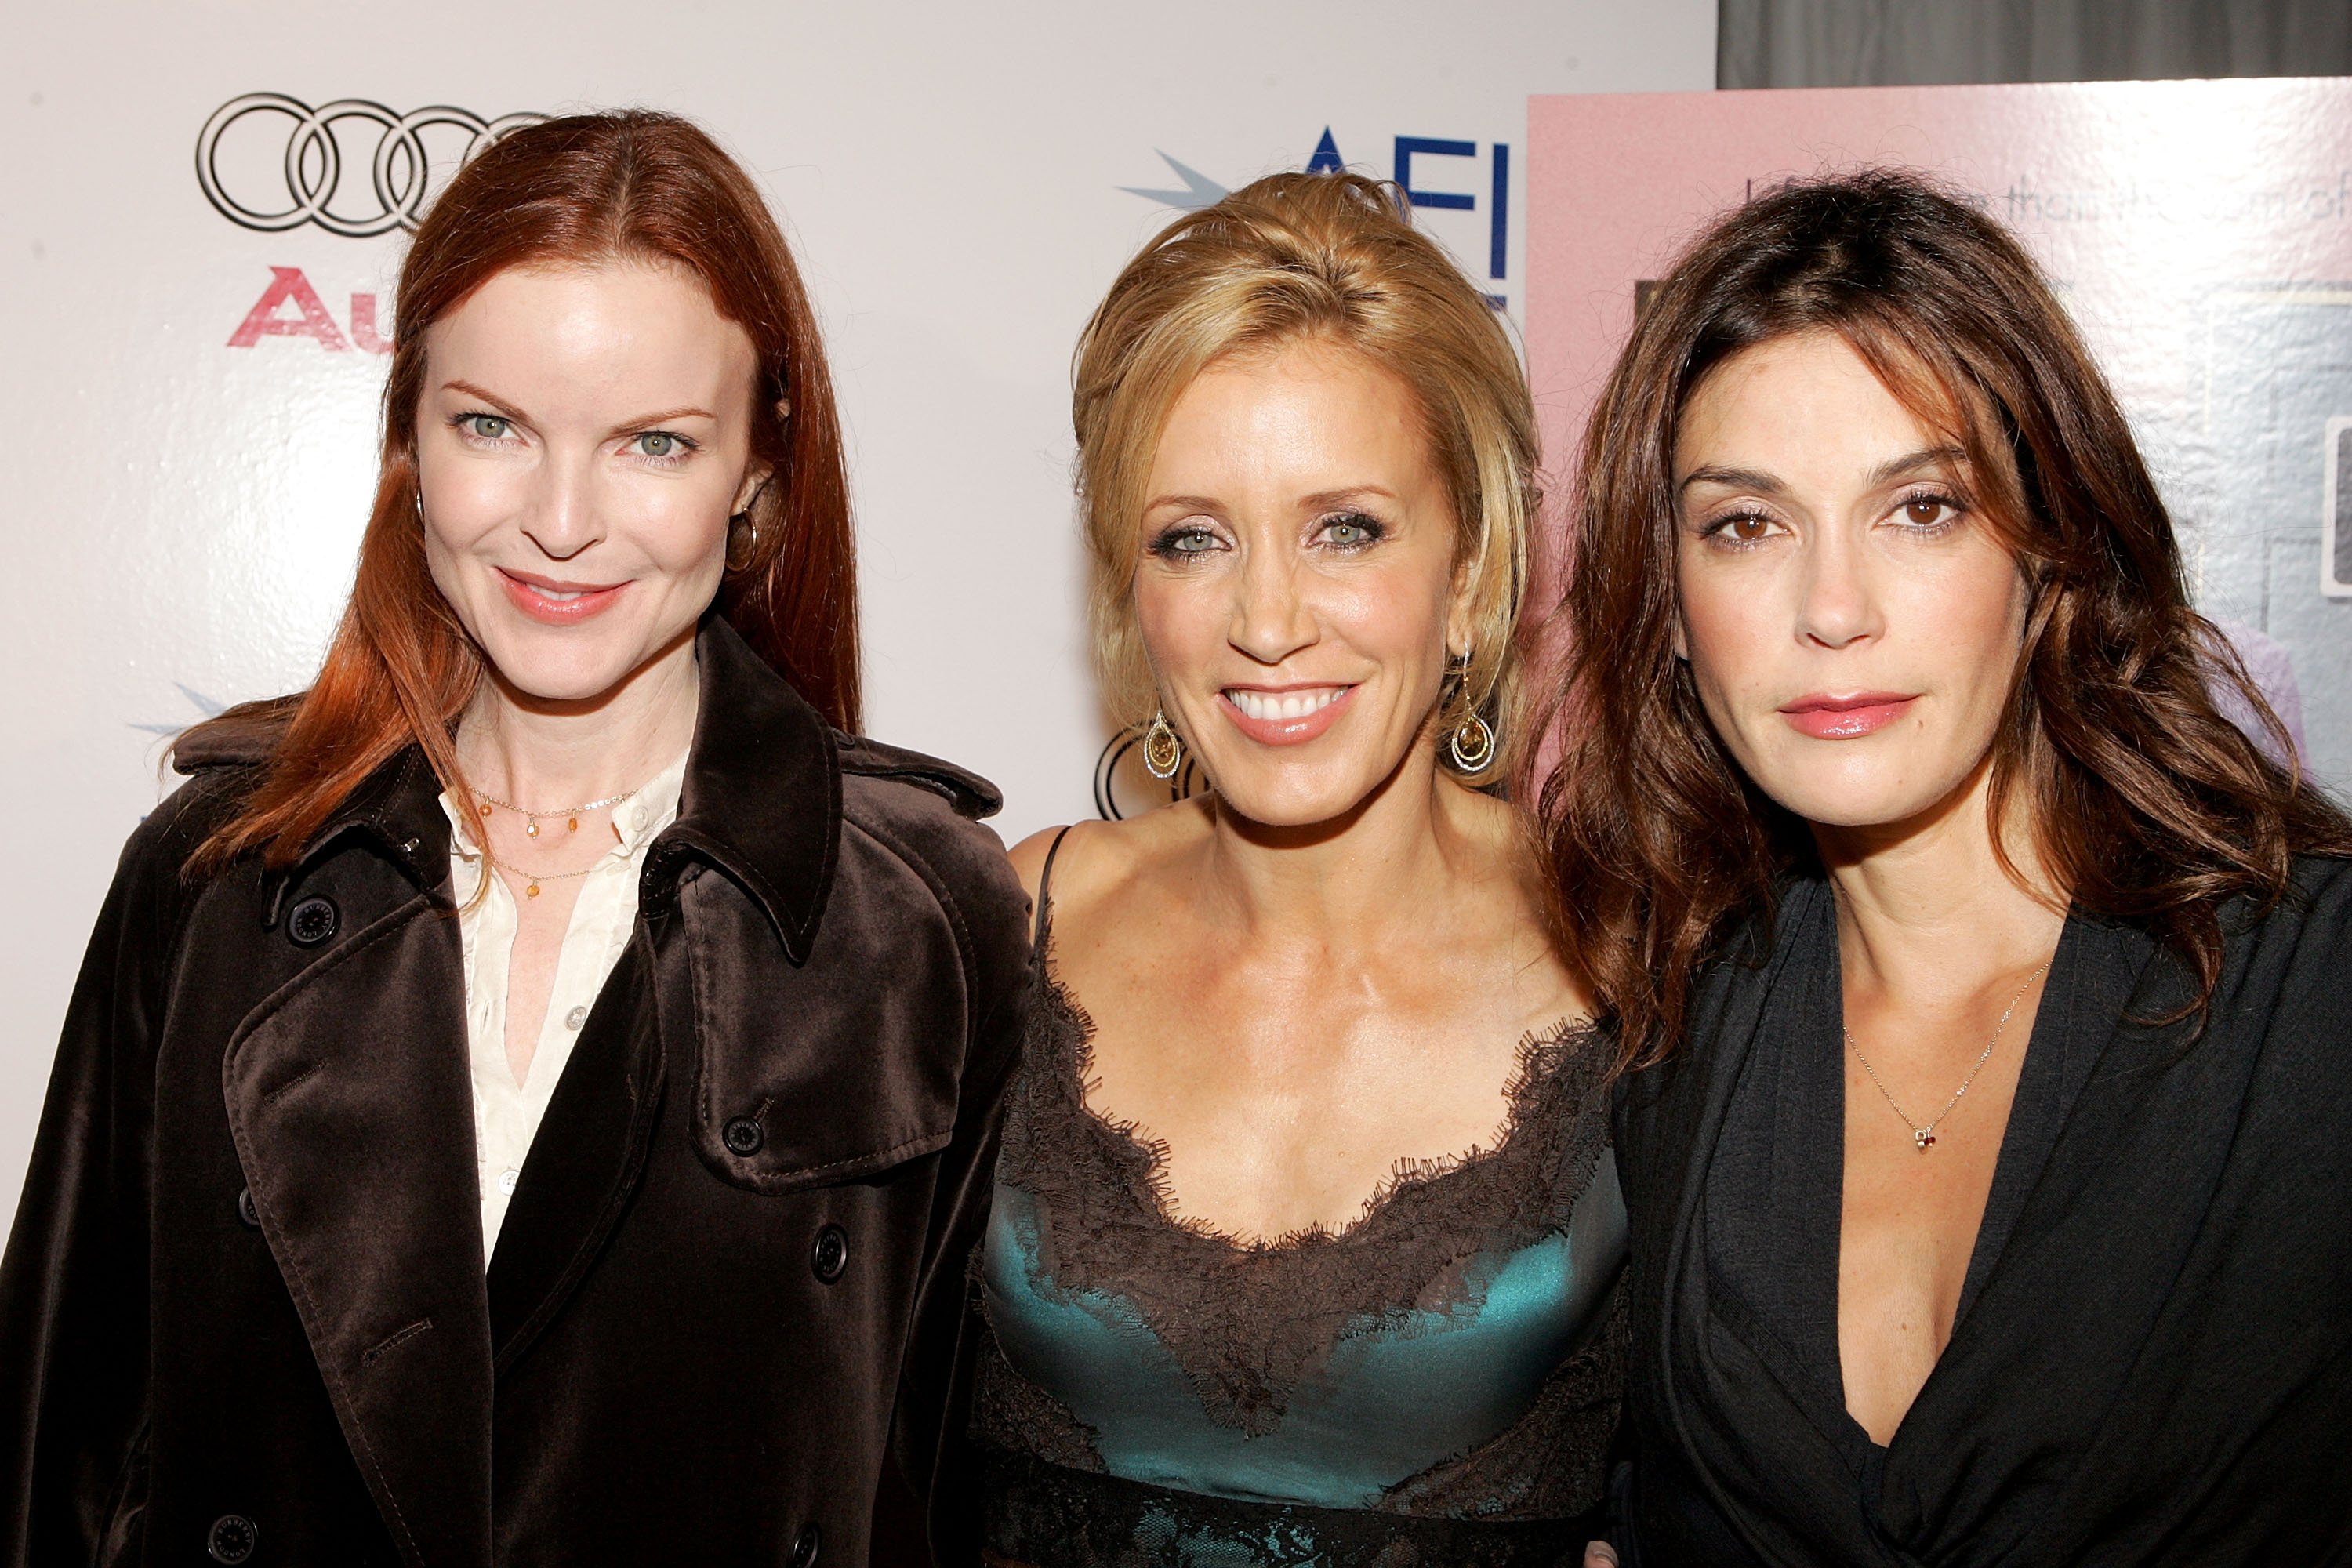 Marcia Cross, Felicity Huffman and Teri Hatcher arrive to the special screening of the film "Transamerica" during AFI Fest presented by Audi at the ArcLight Theatre November 6, 2005, in Hollywood, California. | Source: Getty Images.